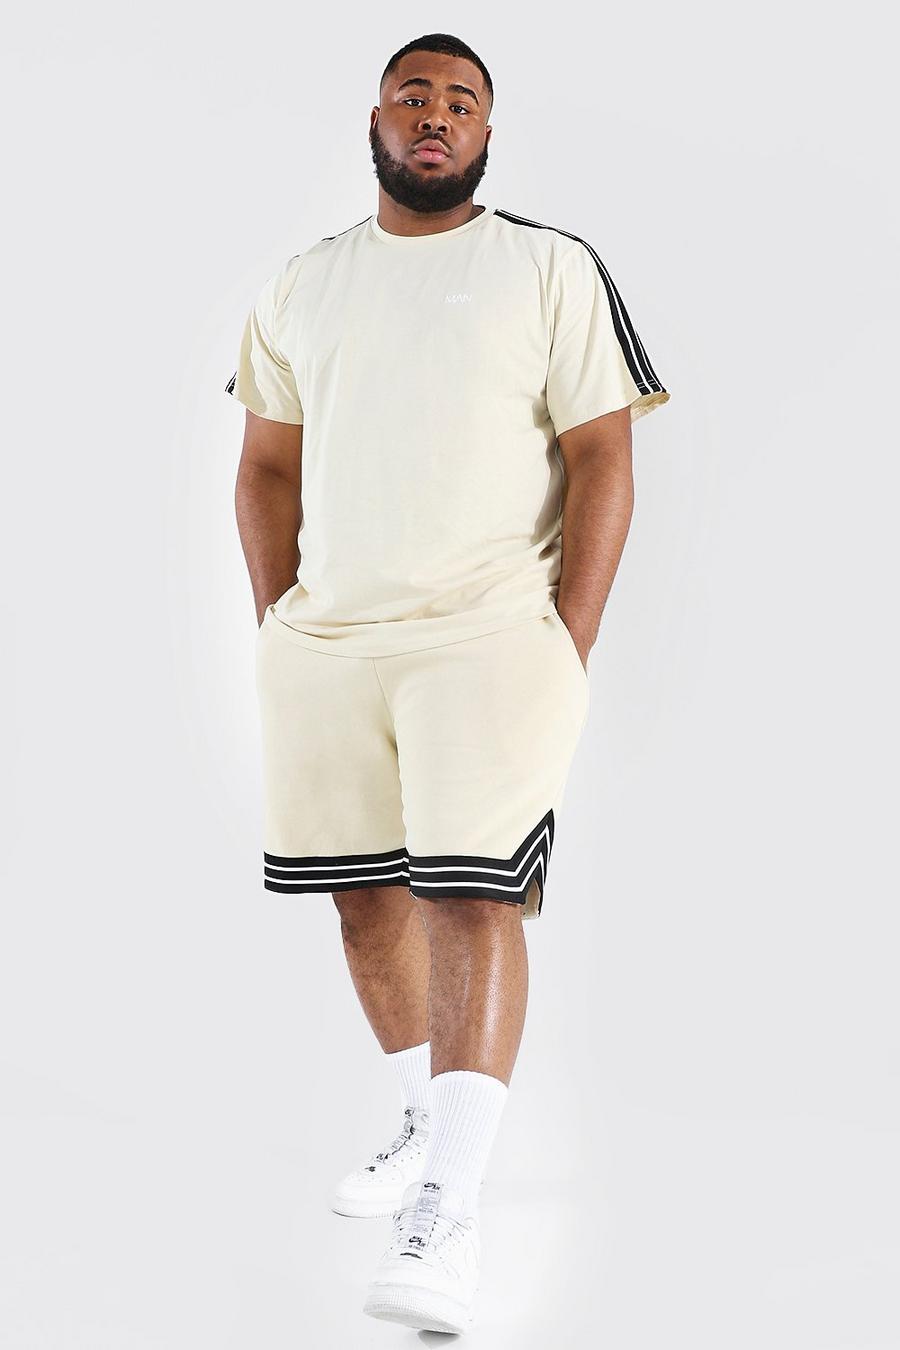 Sand Plus Man Tape Tee And Basketball Short Set image number 1